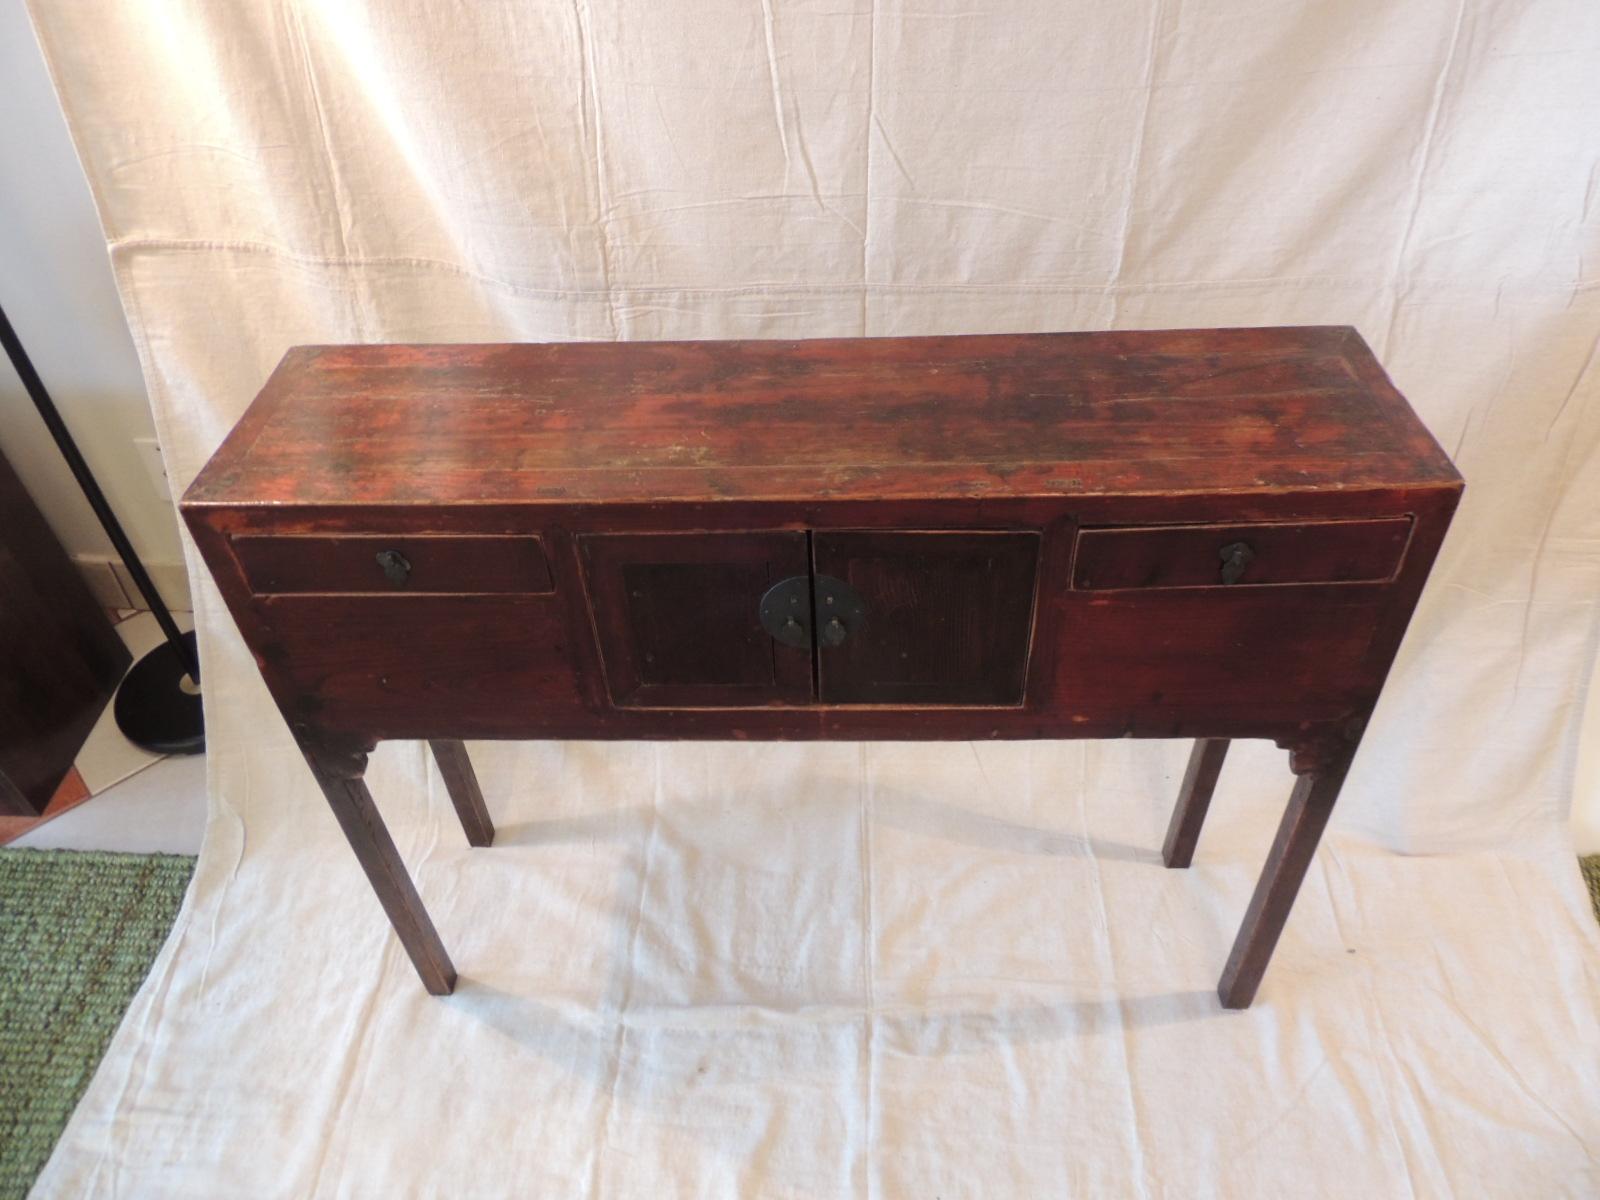 Chinese Vintage Asian Lacquered Red Console Table with Drawers and Doors